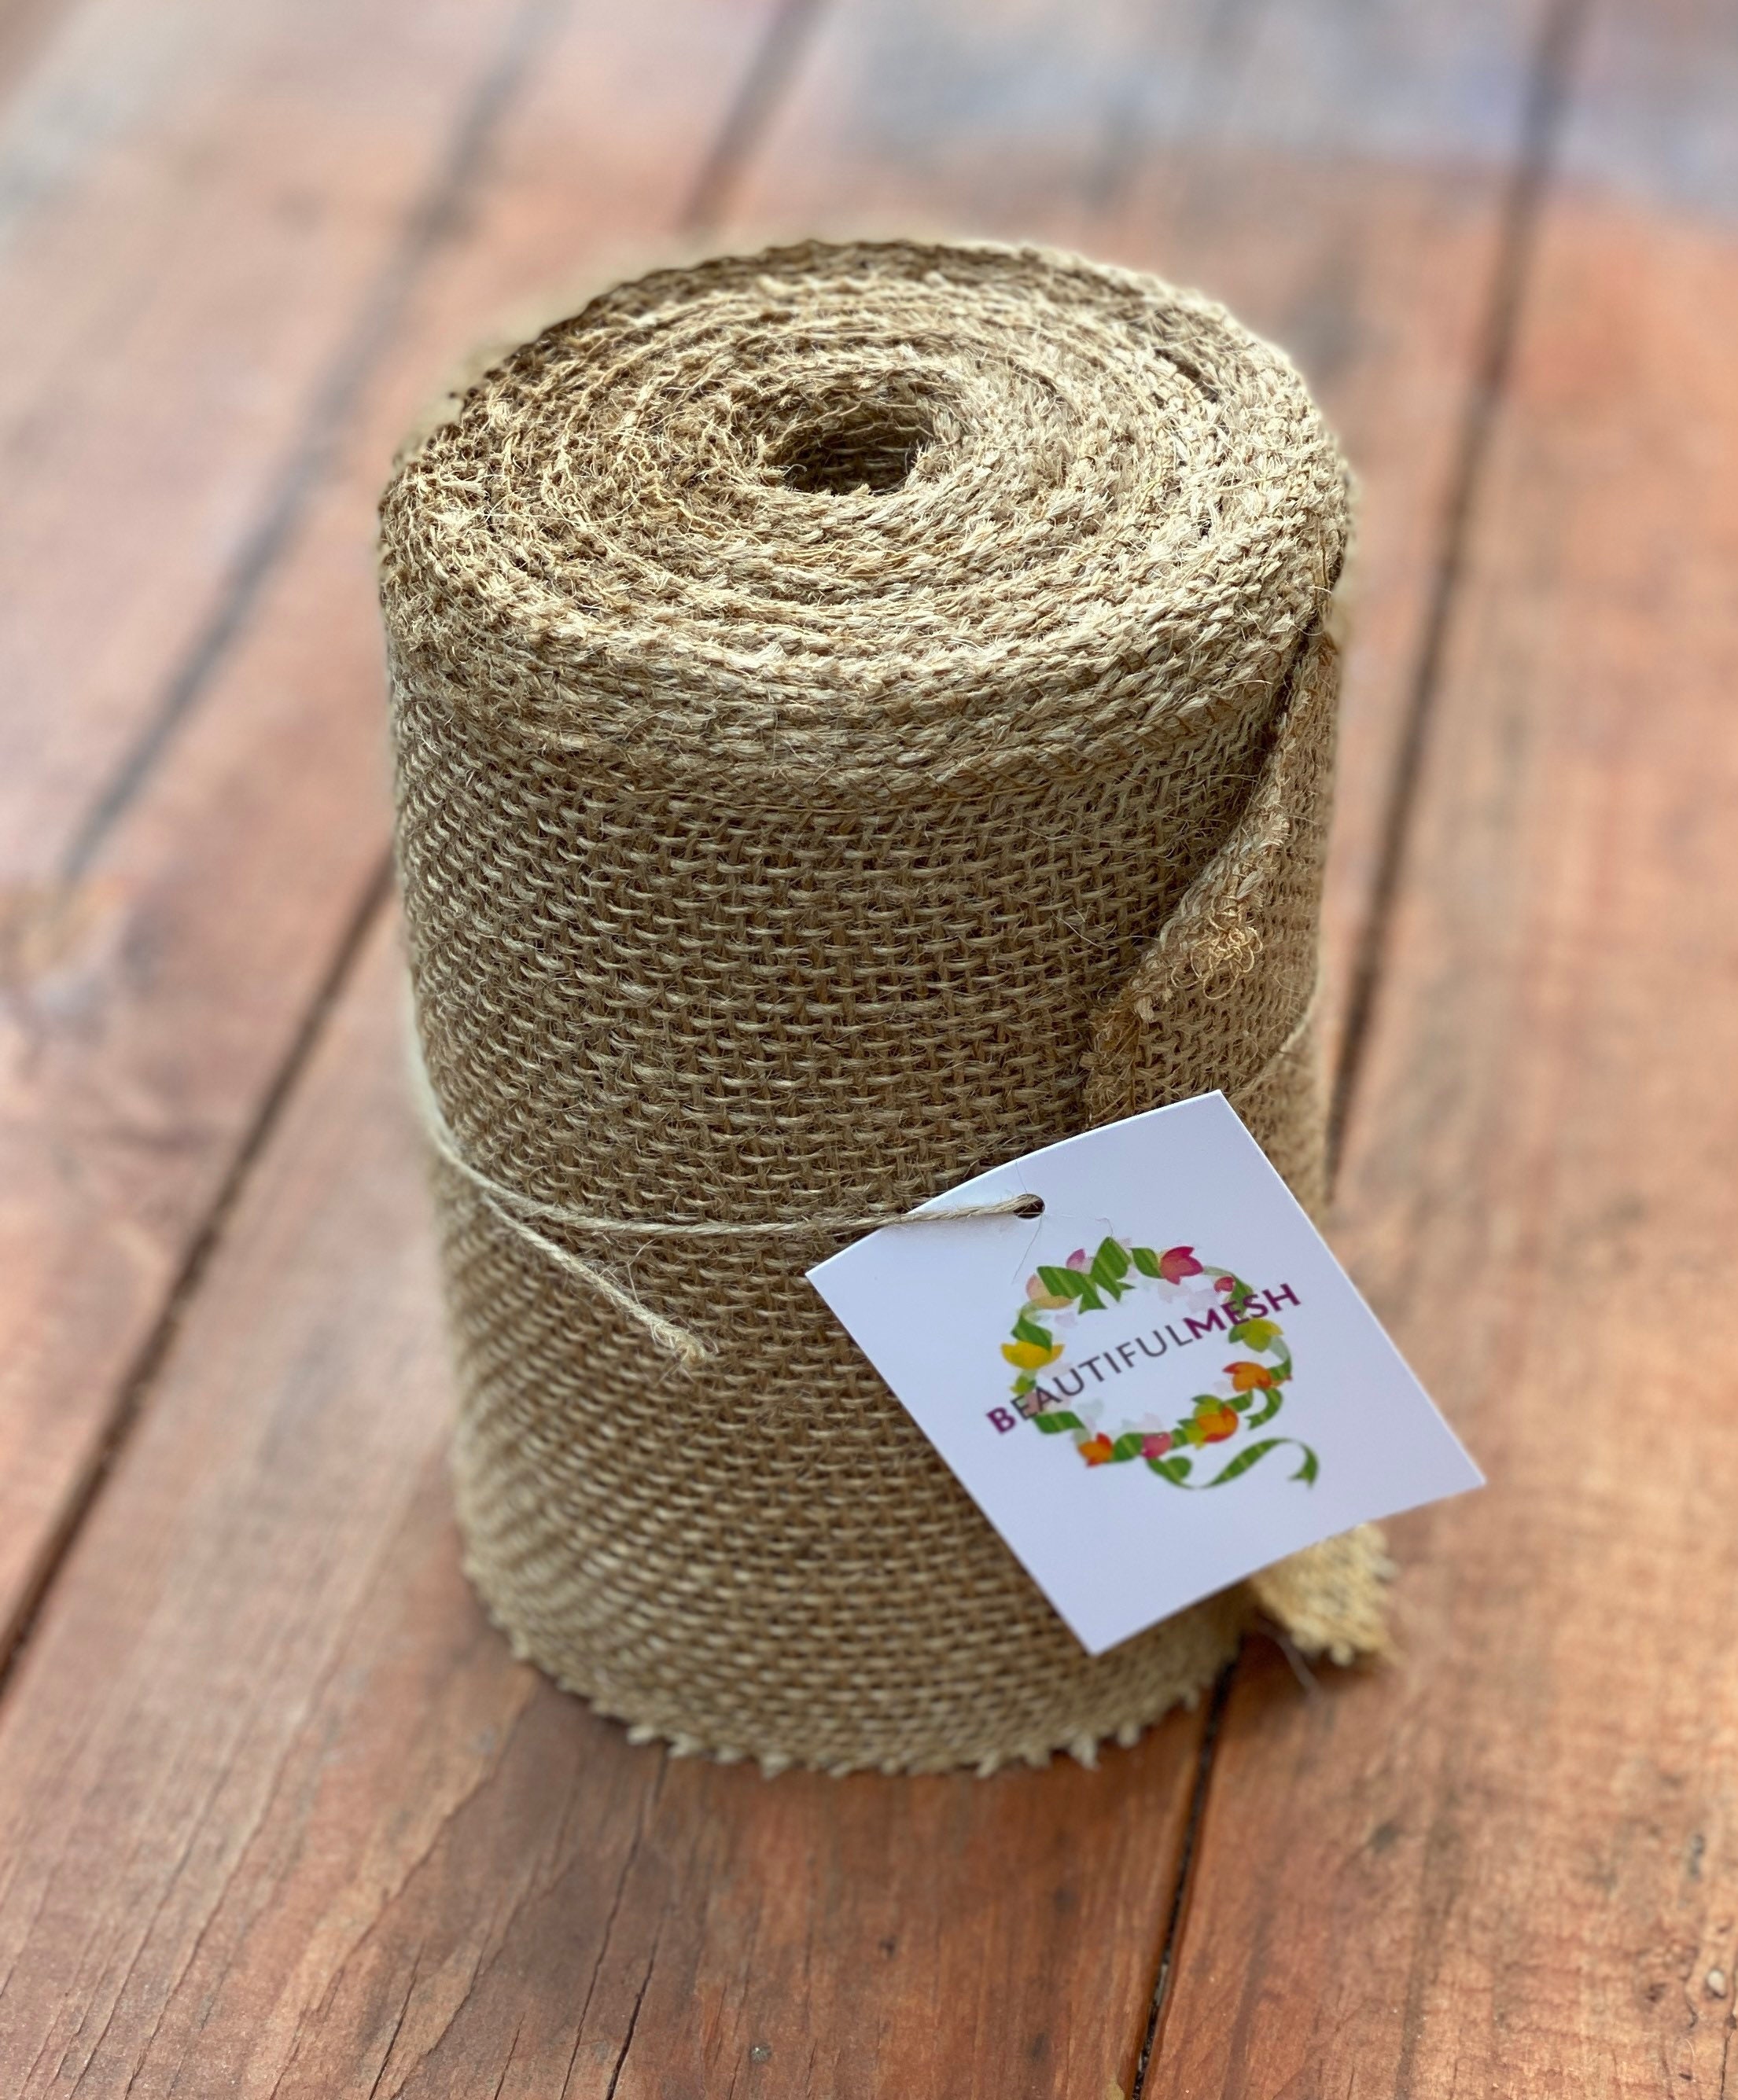 Home Jute Fiber Lace Holiday Decoration Burlap Roll Colored Ribbon Navy Blue - Brown, Navy Blue